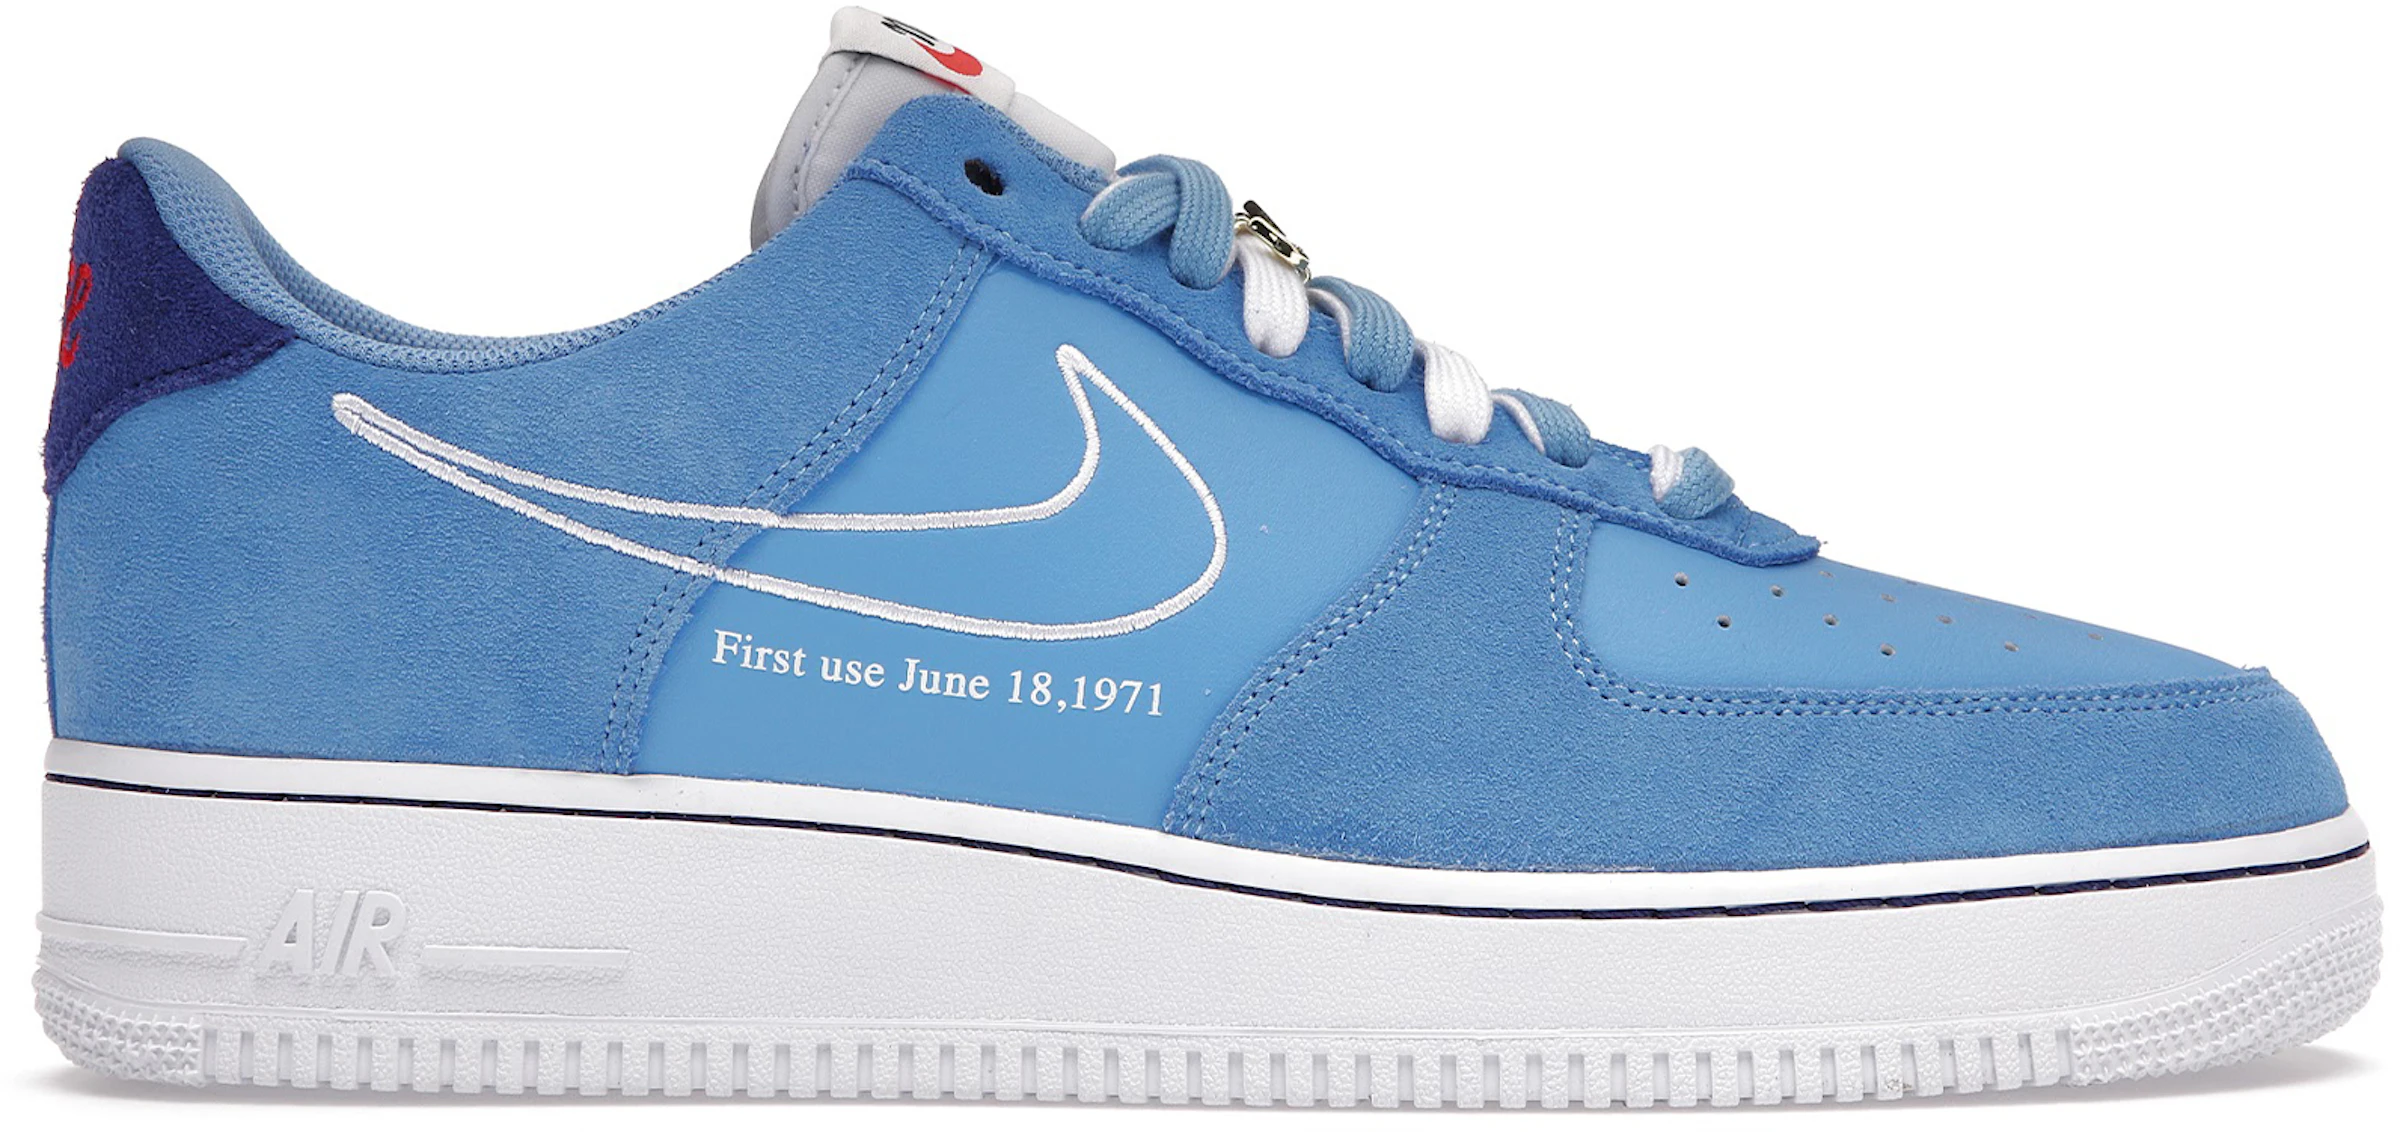 carrera Colonial Eléctrico Nike Air Force 1 Low First Use University Blue - DB3597-400 - ES